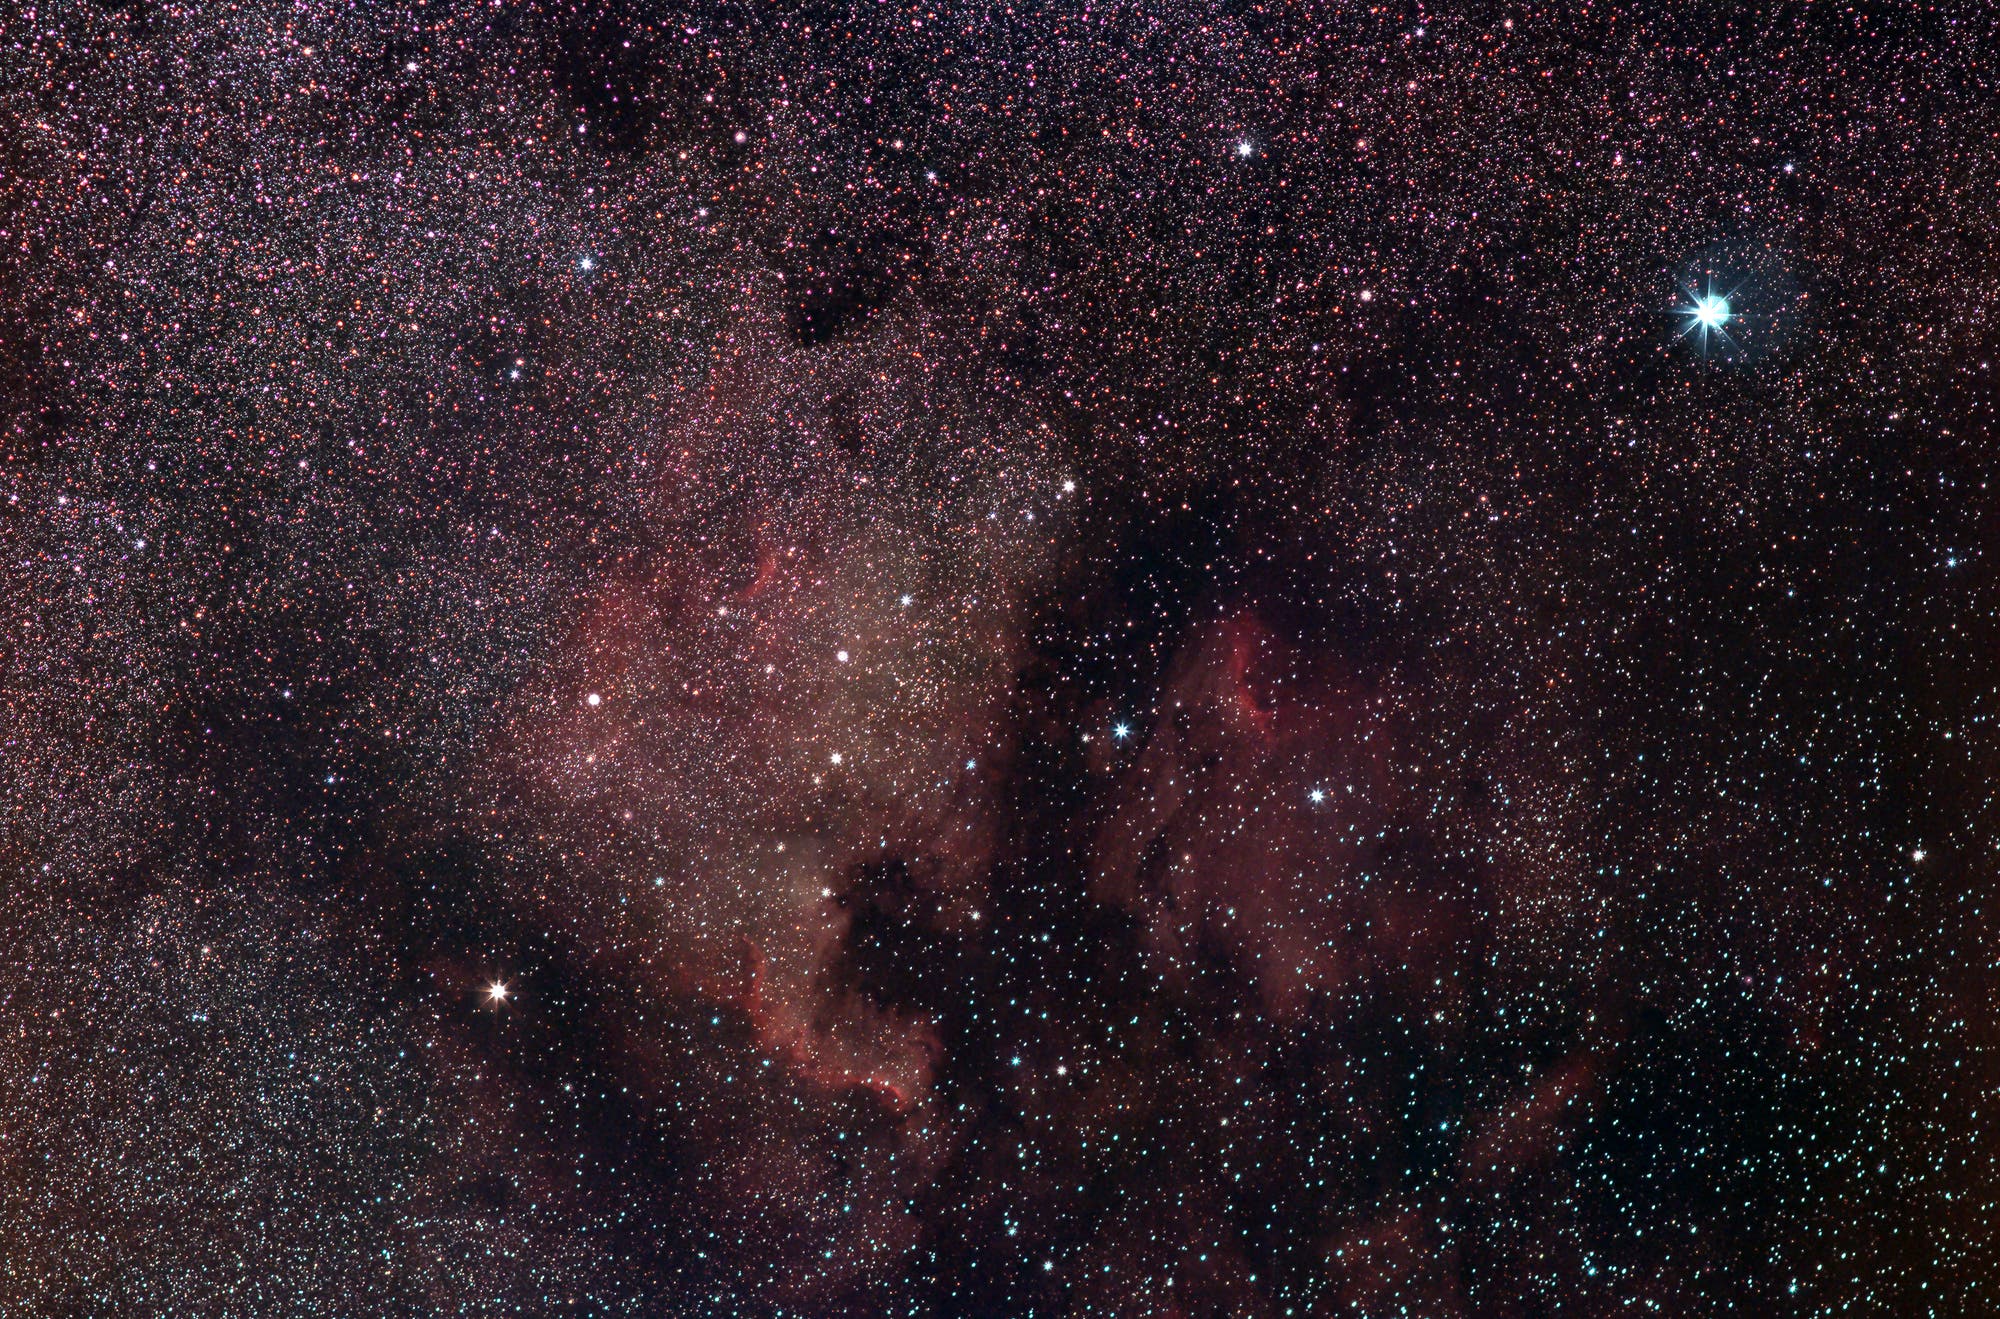 NGC 7000 and IC 5070 in Cygnus during lockdown